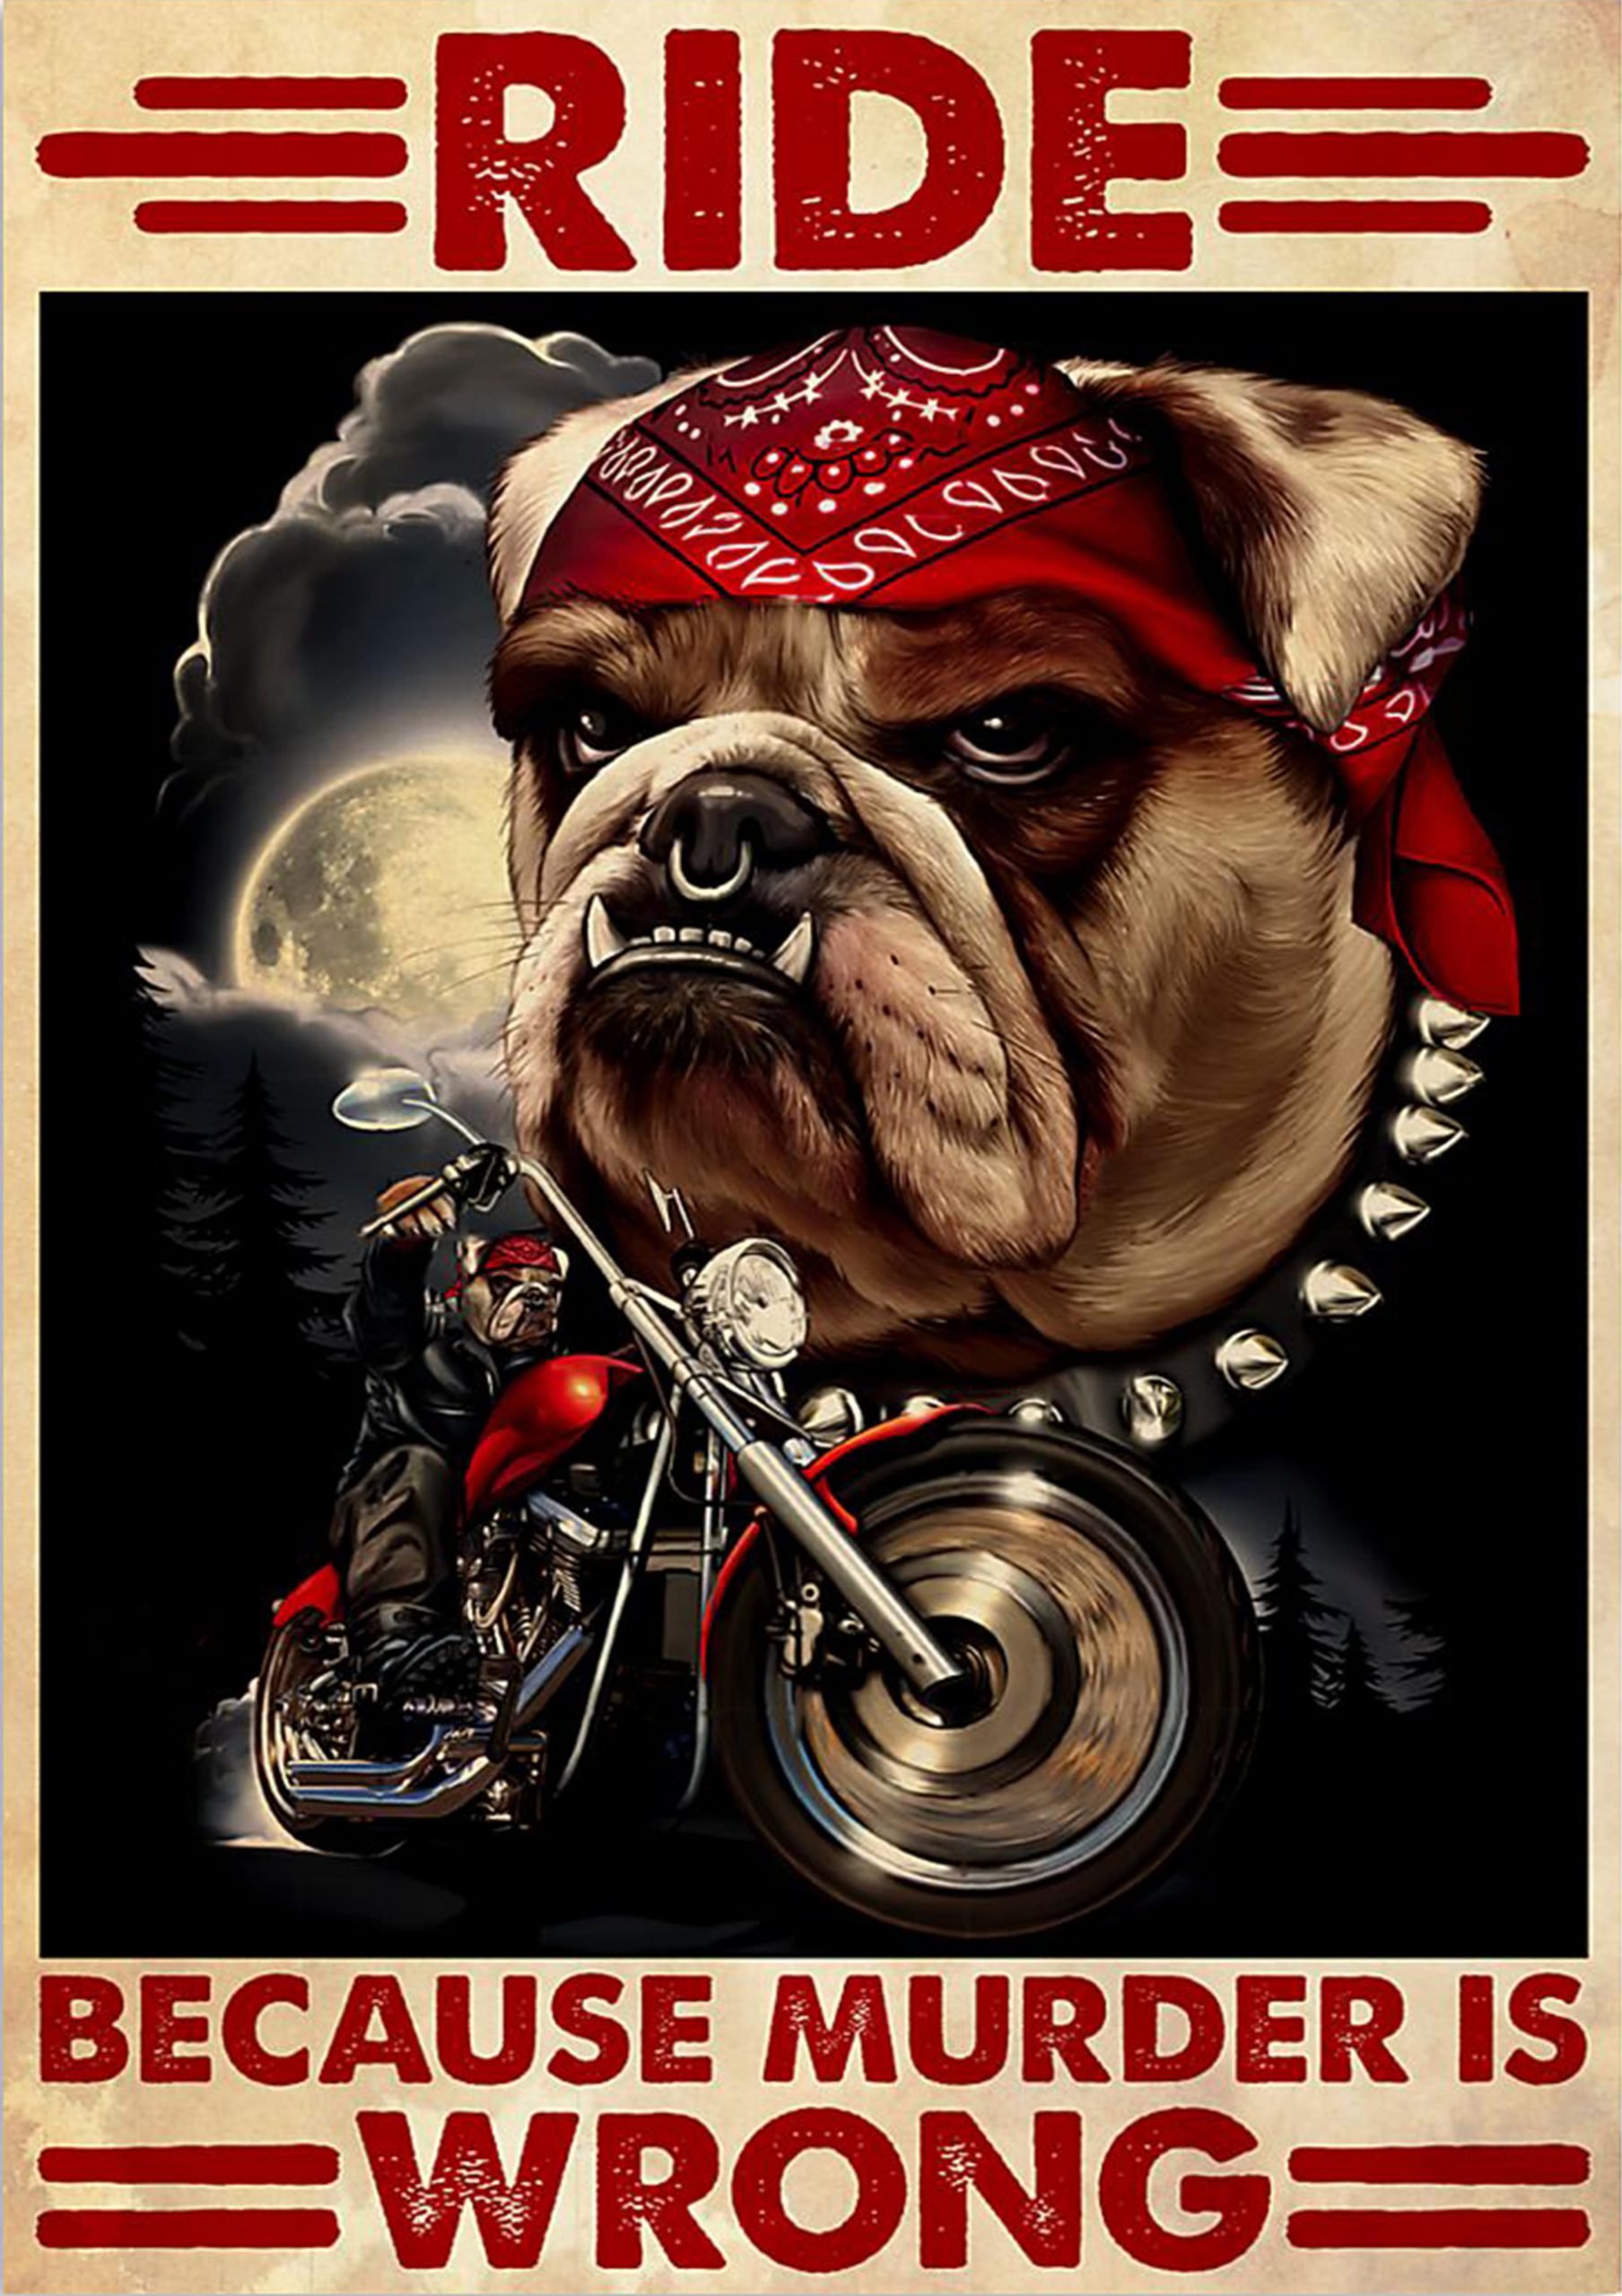 vintage bull dog motorcycles ride because murder is wrong poster 1 - Copy (2)